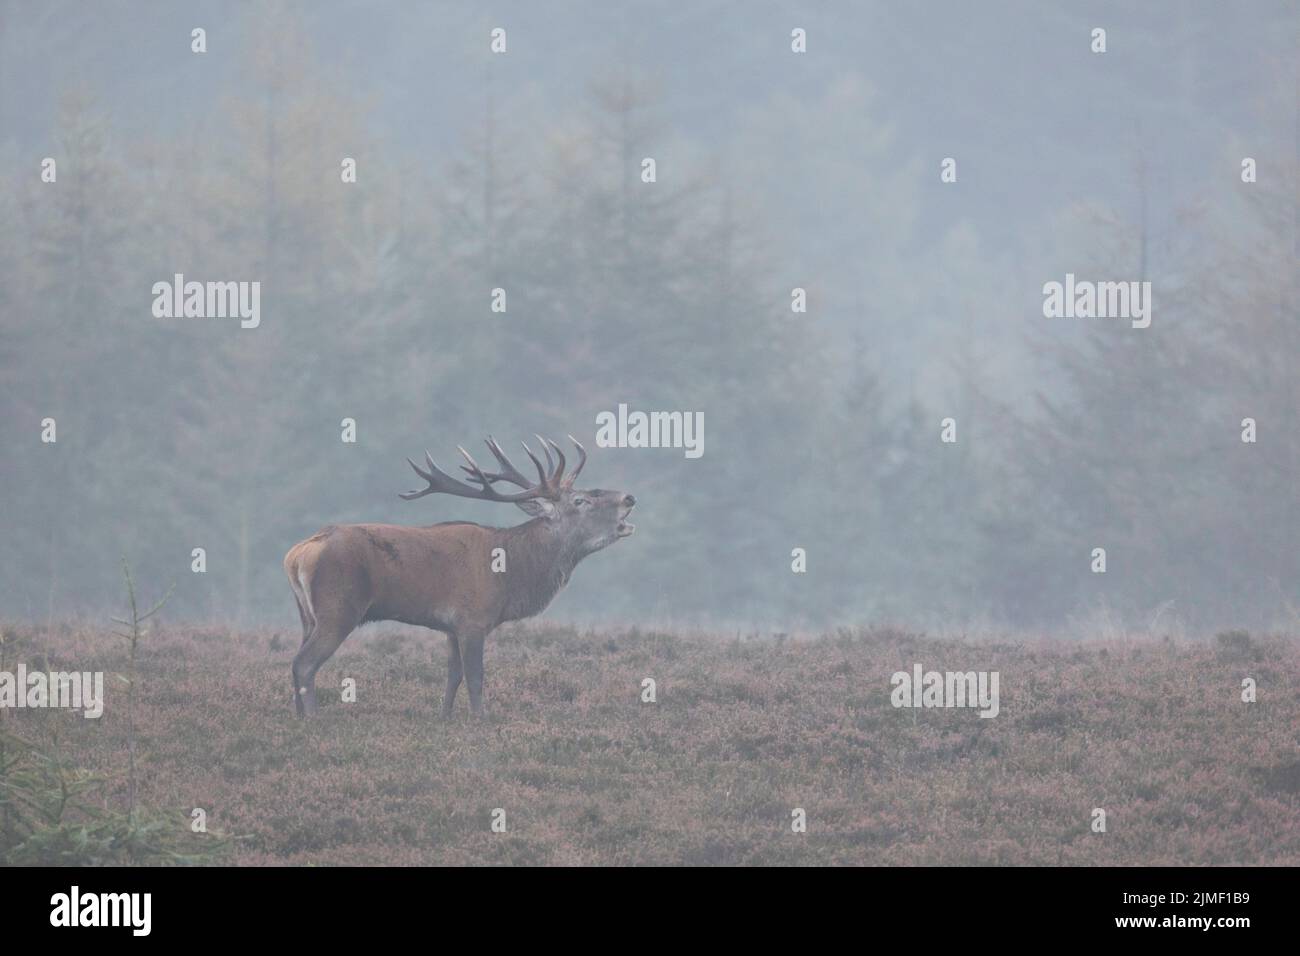 A Red stag stands roaring on a heathland / Cervus elaphus Stock Photo